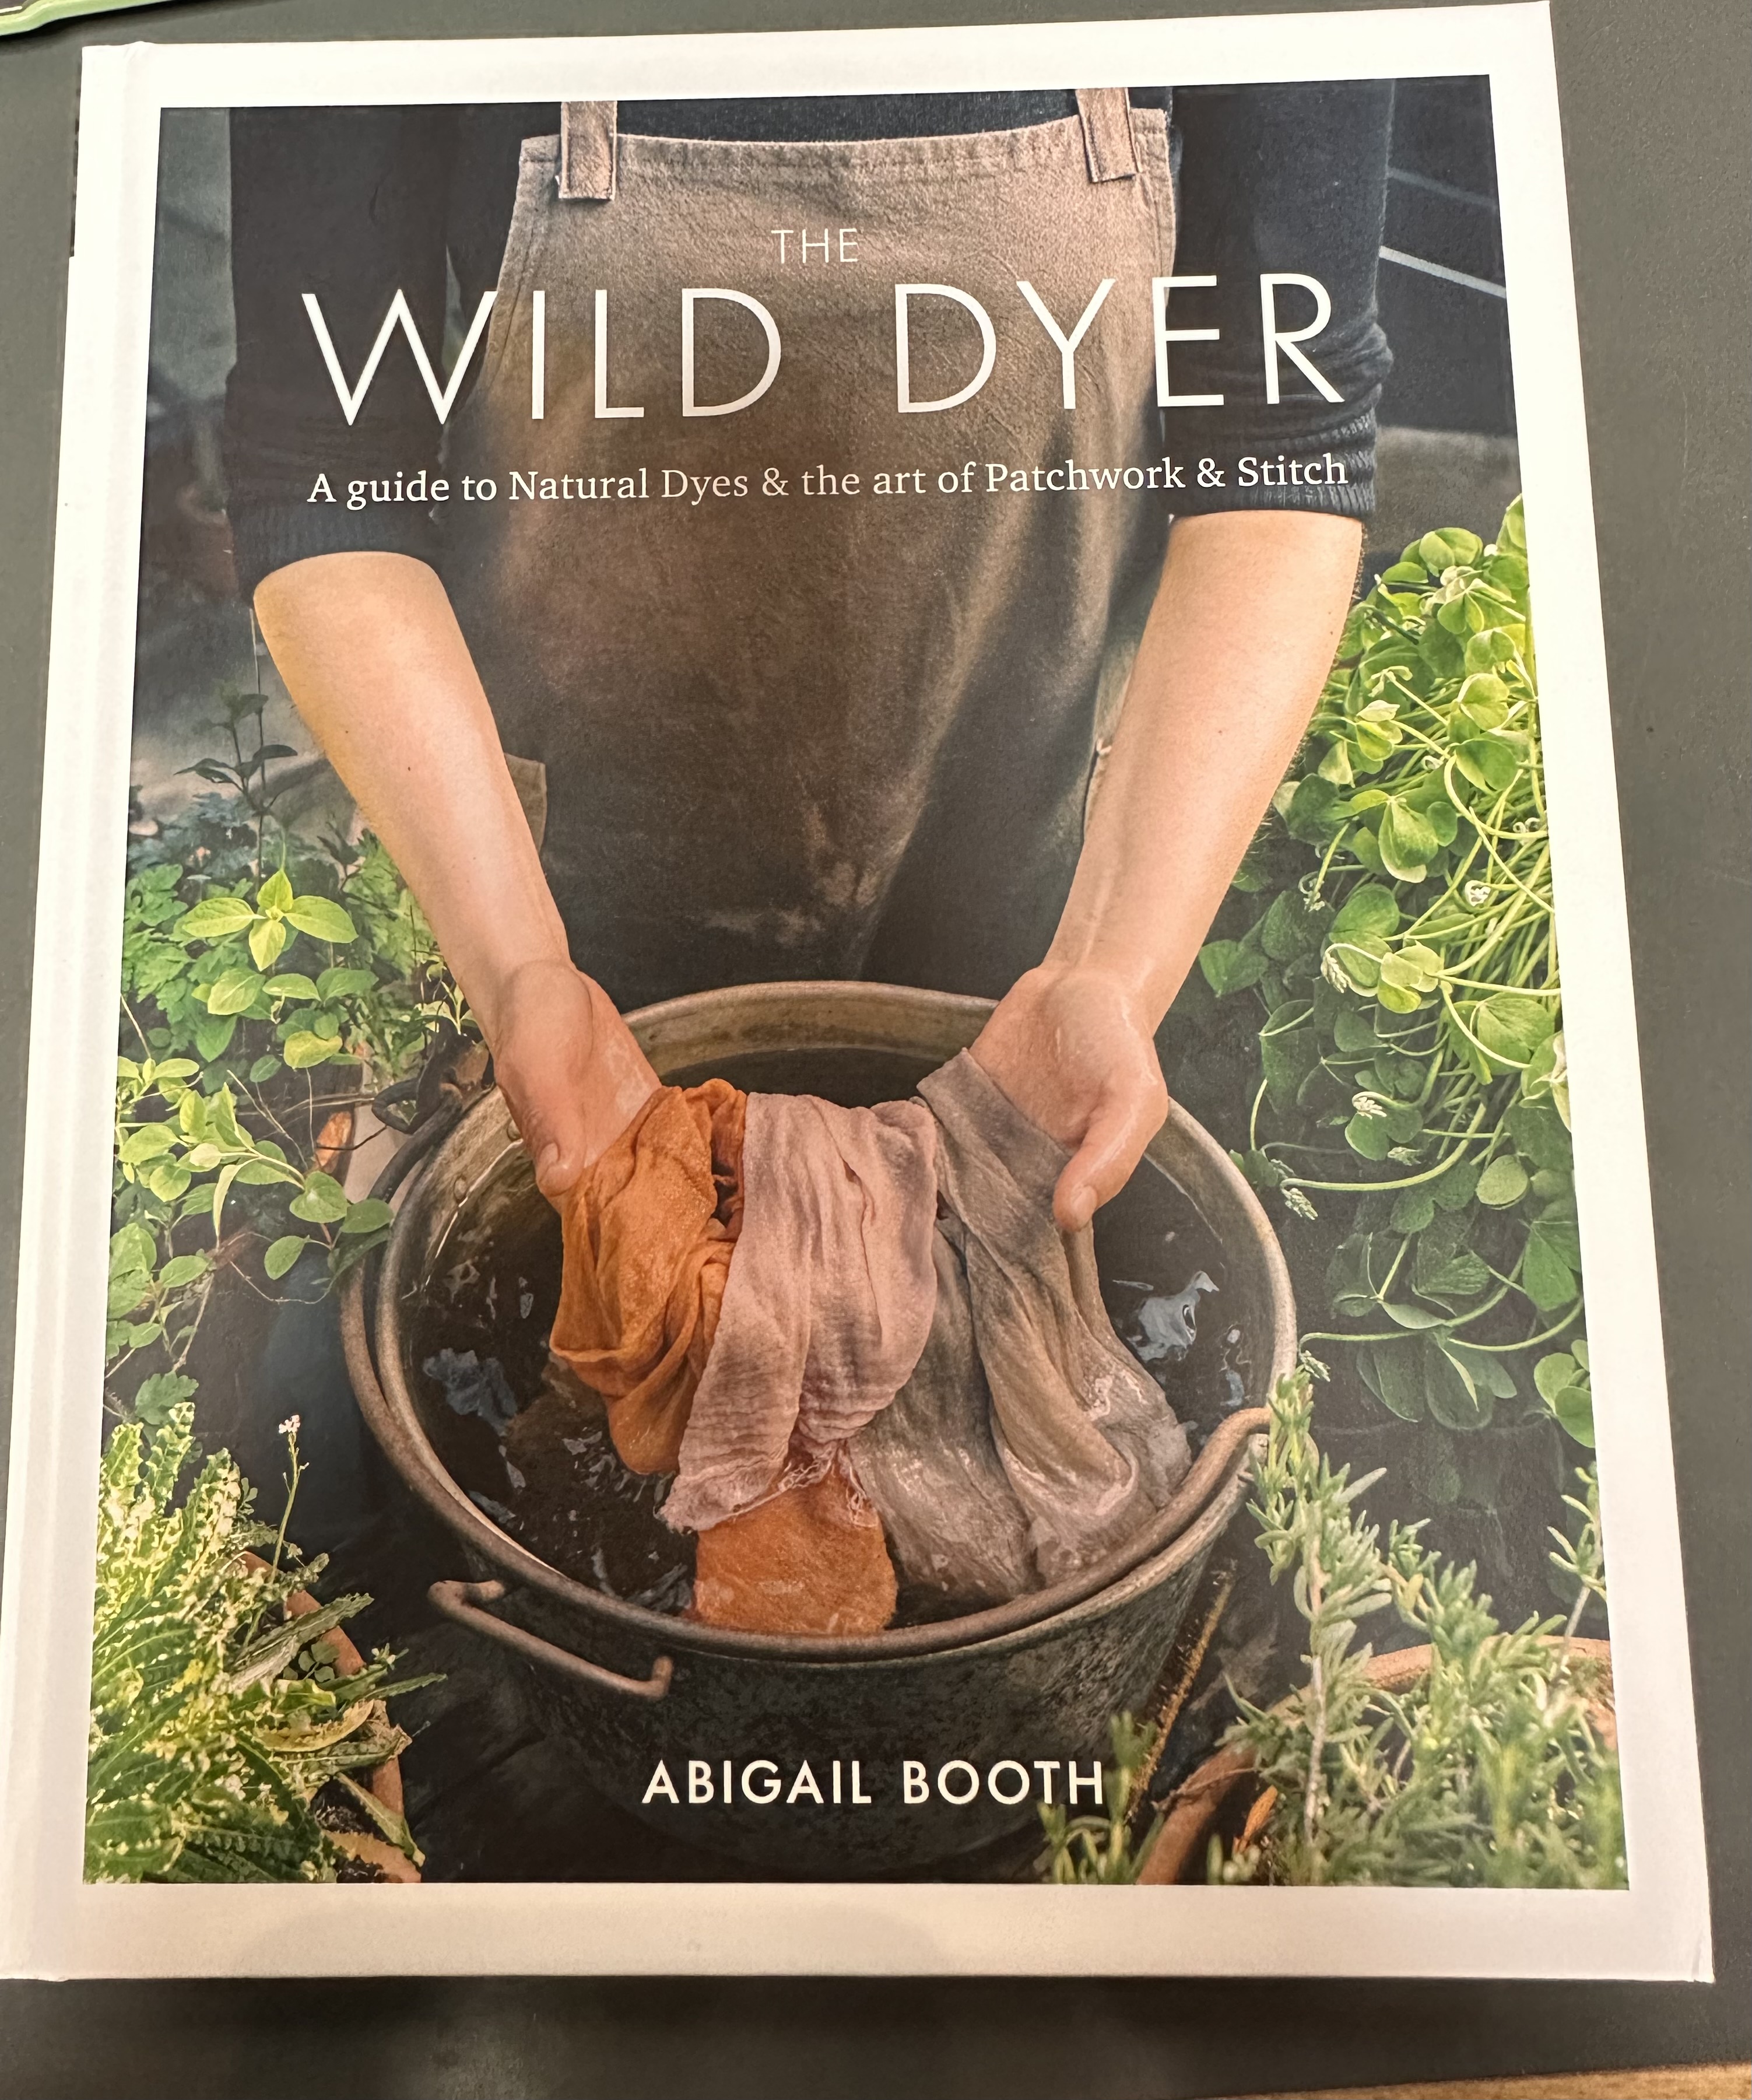 The cover of the book 'The Wild Dyer: A guide to Natural Dyes & the art of Patchwork & Stitch' by Abigail Booth